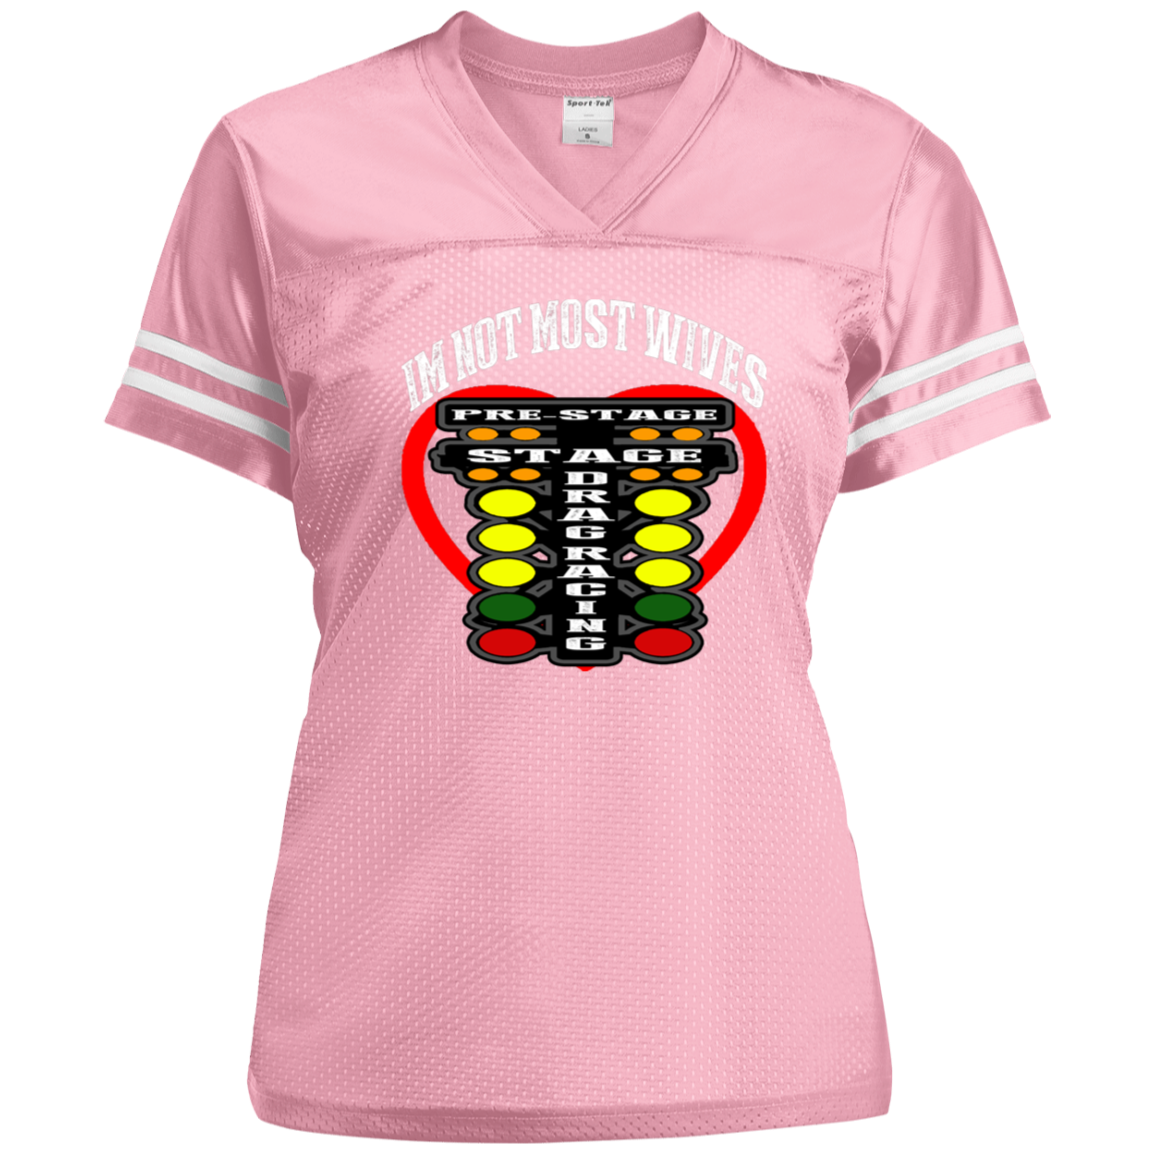 I'm Not Most Wives Drag Racing Ladies' Replica Jersey